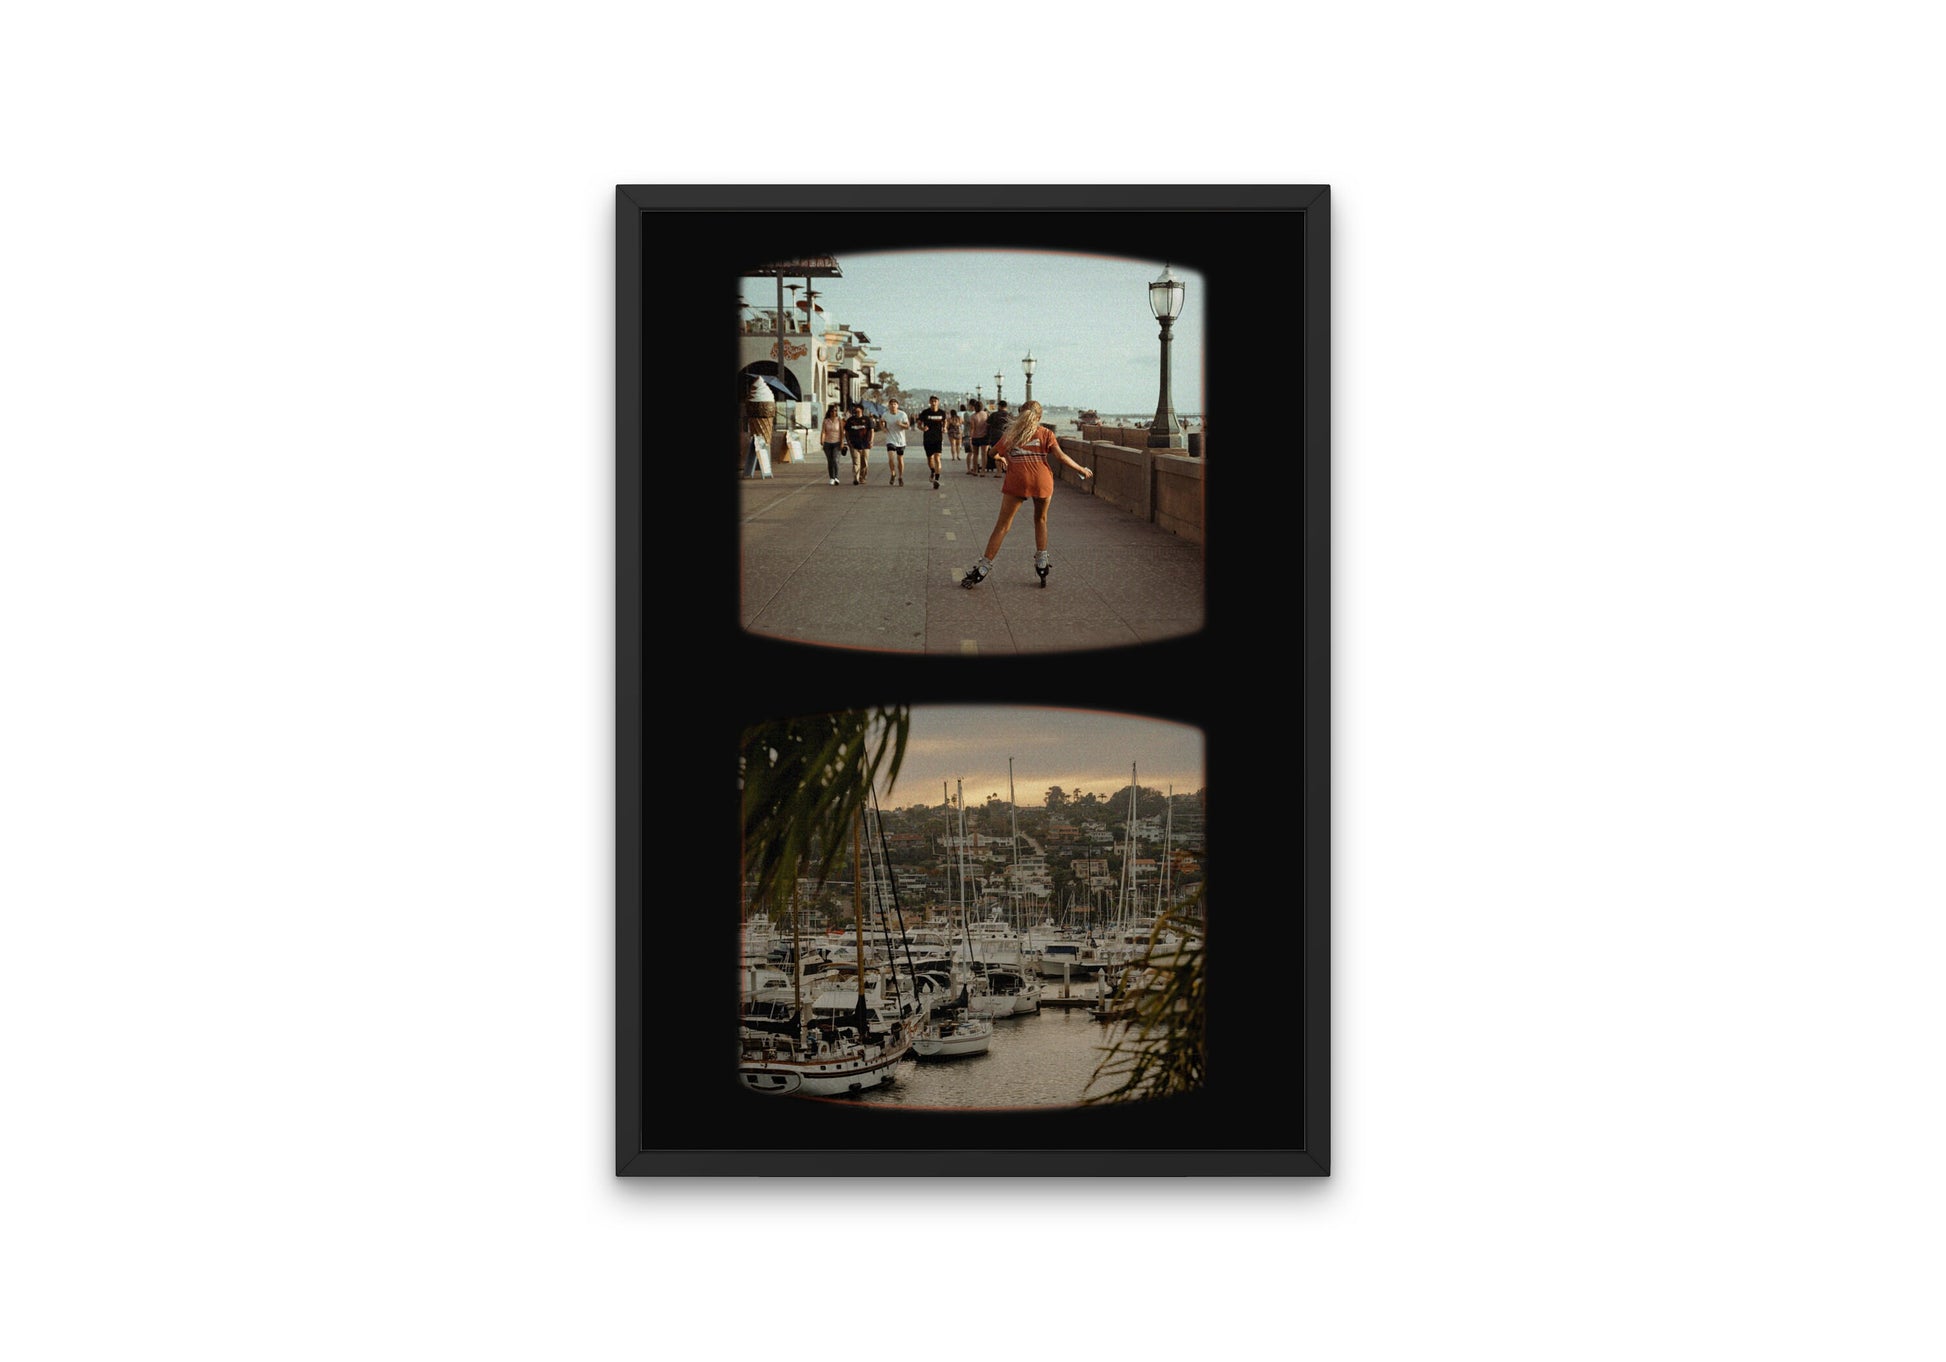 Roller Skate Poster INSTANT DOWNLOAD, Pacific Beach California, Grunge room décor, Skateboard wall art, Punk poster, y2k poster beach scene